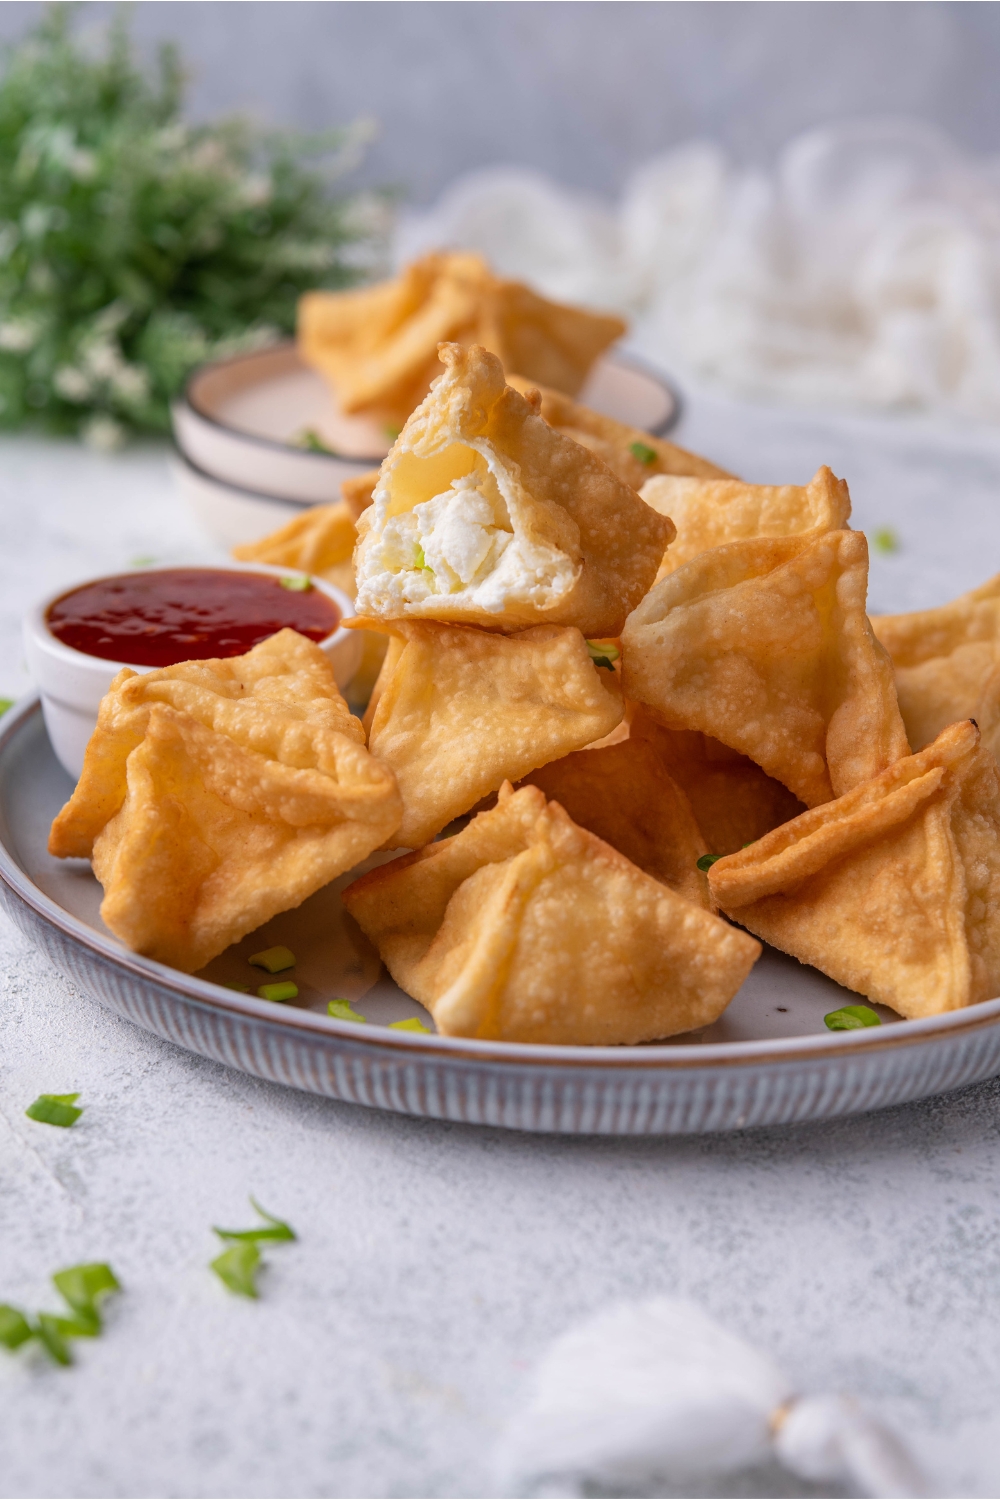 A pile of Panda Express cream cheese rangoon piled high on a plate with a serving of dipping sauce. A bite has been taken out of one of the rangoon.